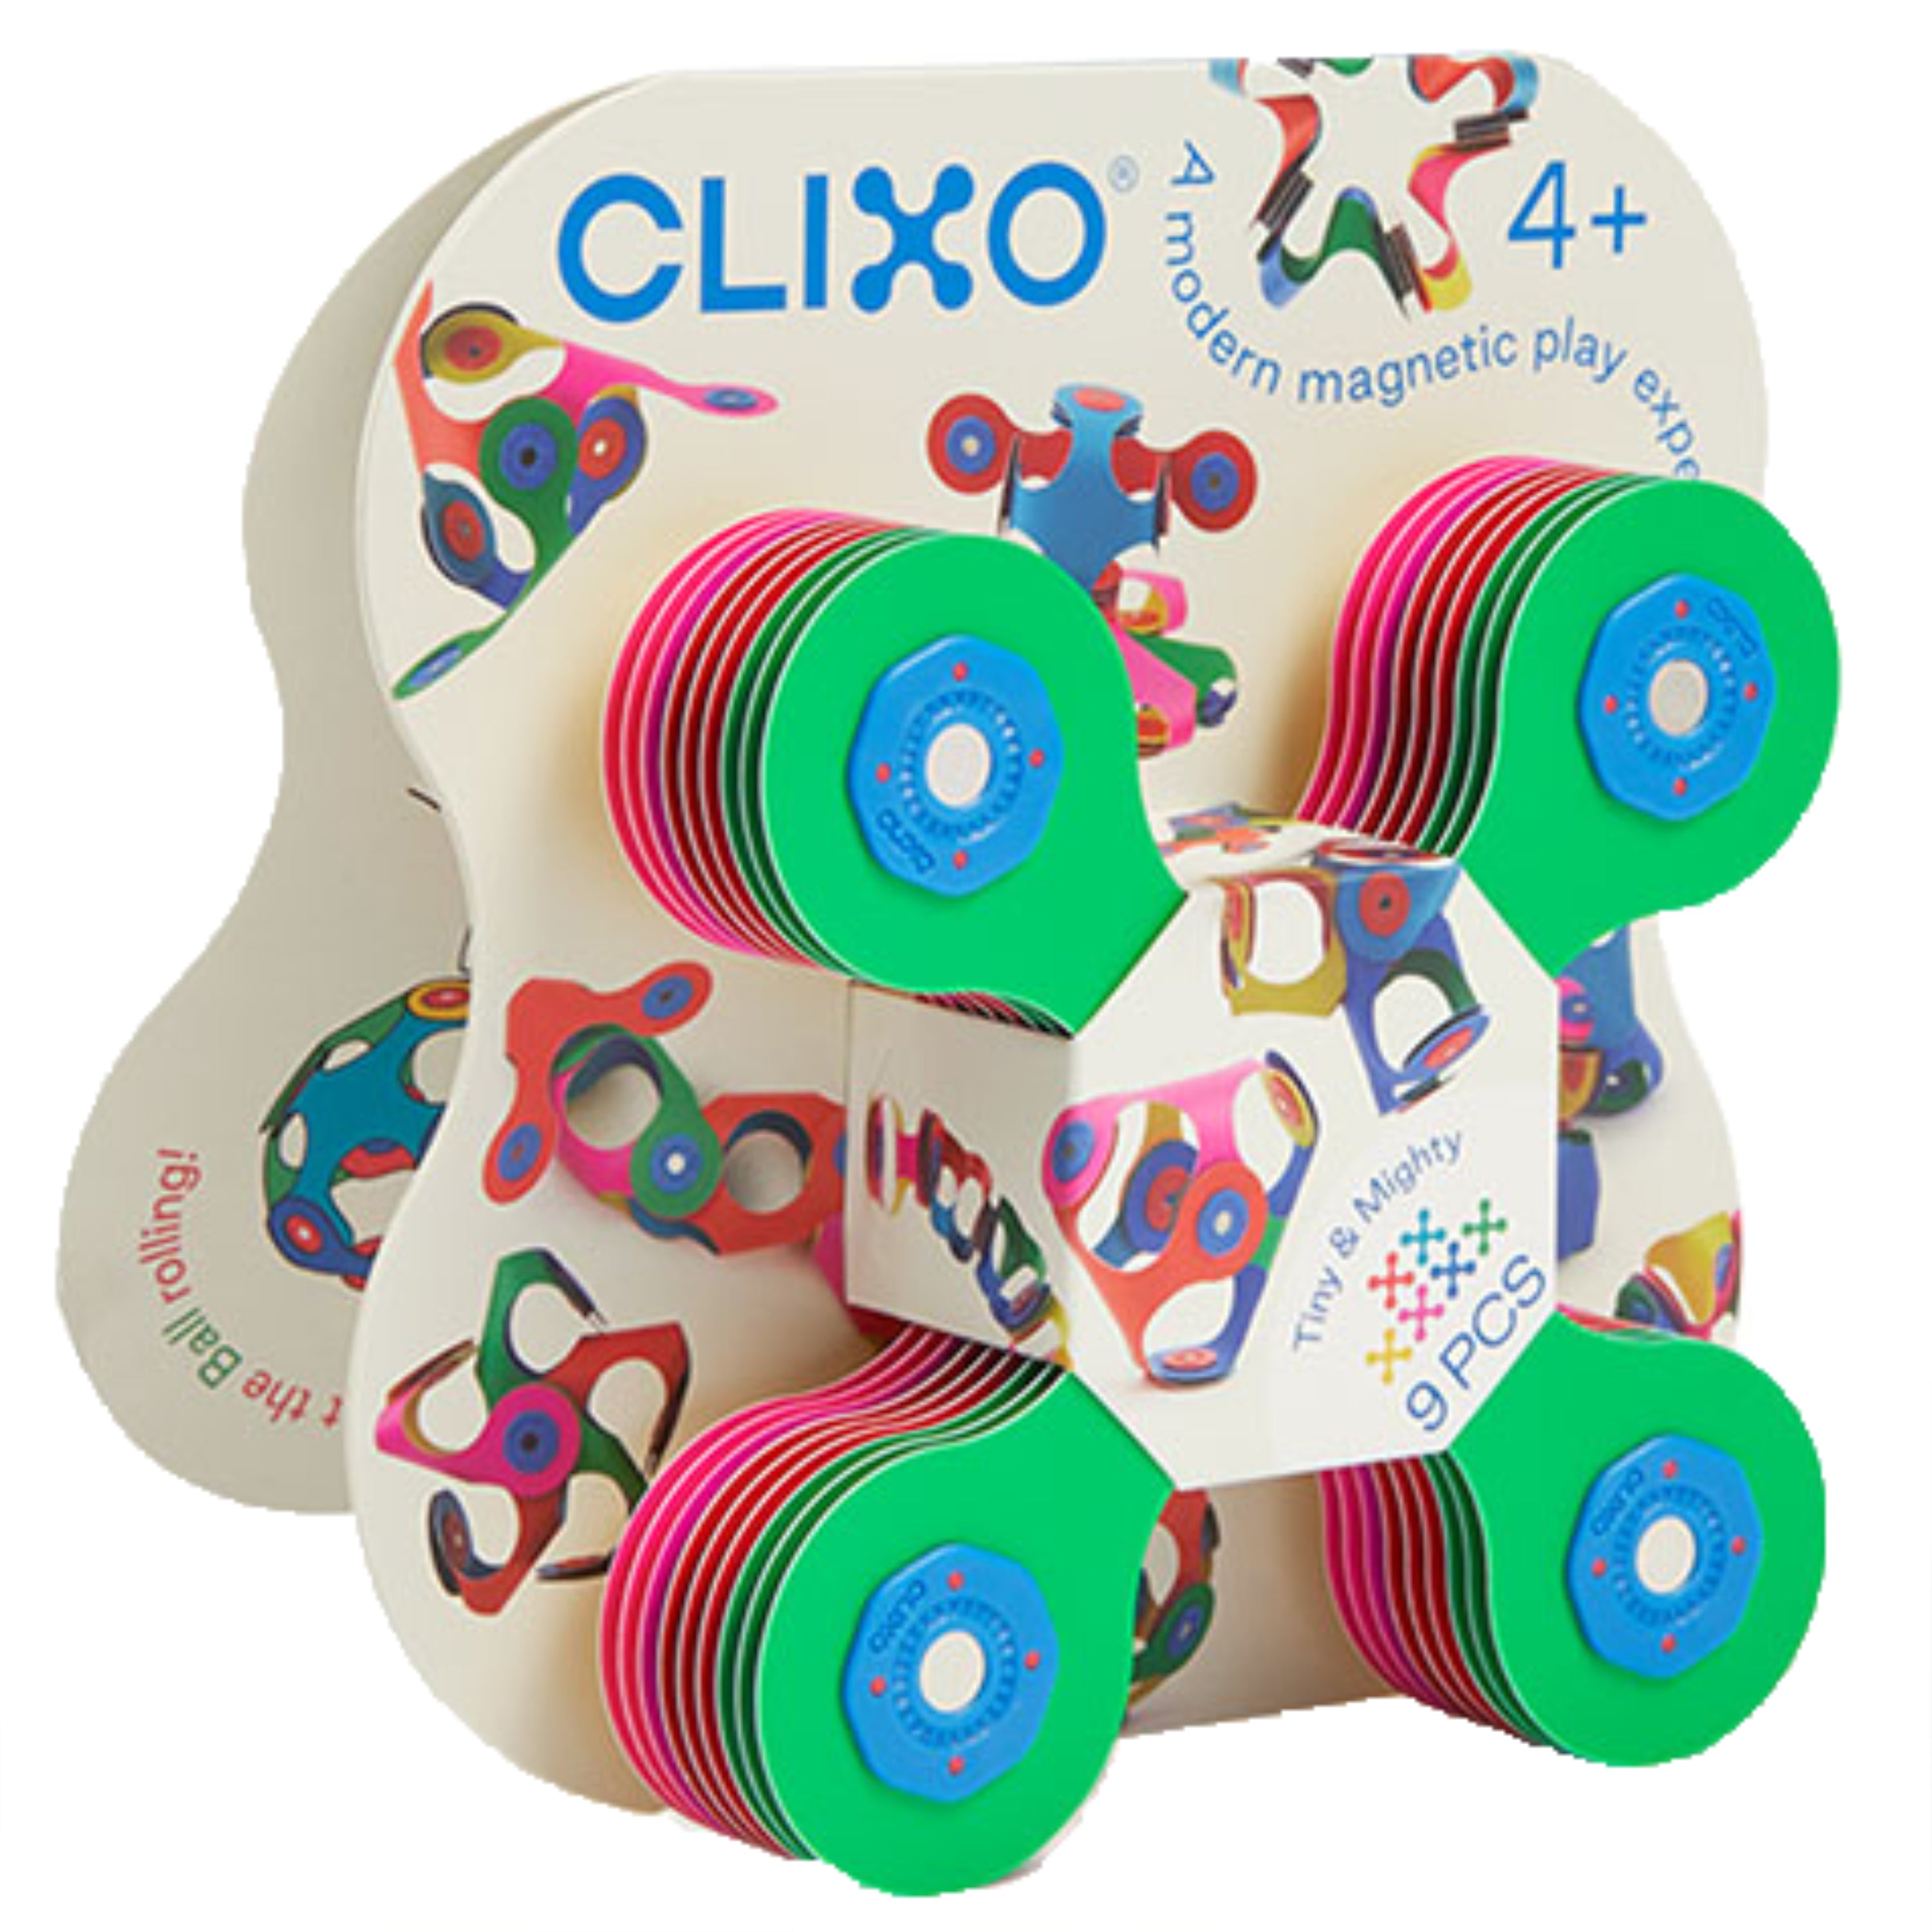 Clixo Tiny And Mighty Magnet Travel Toy – 9pc